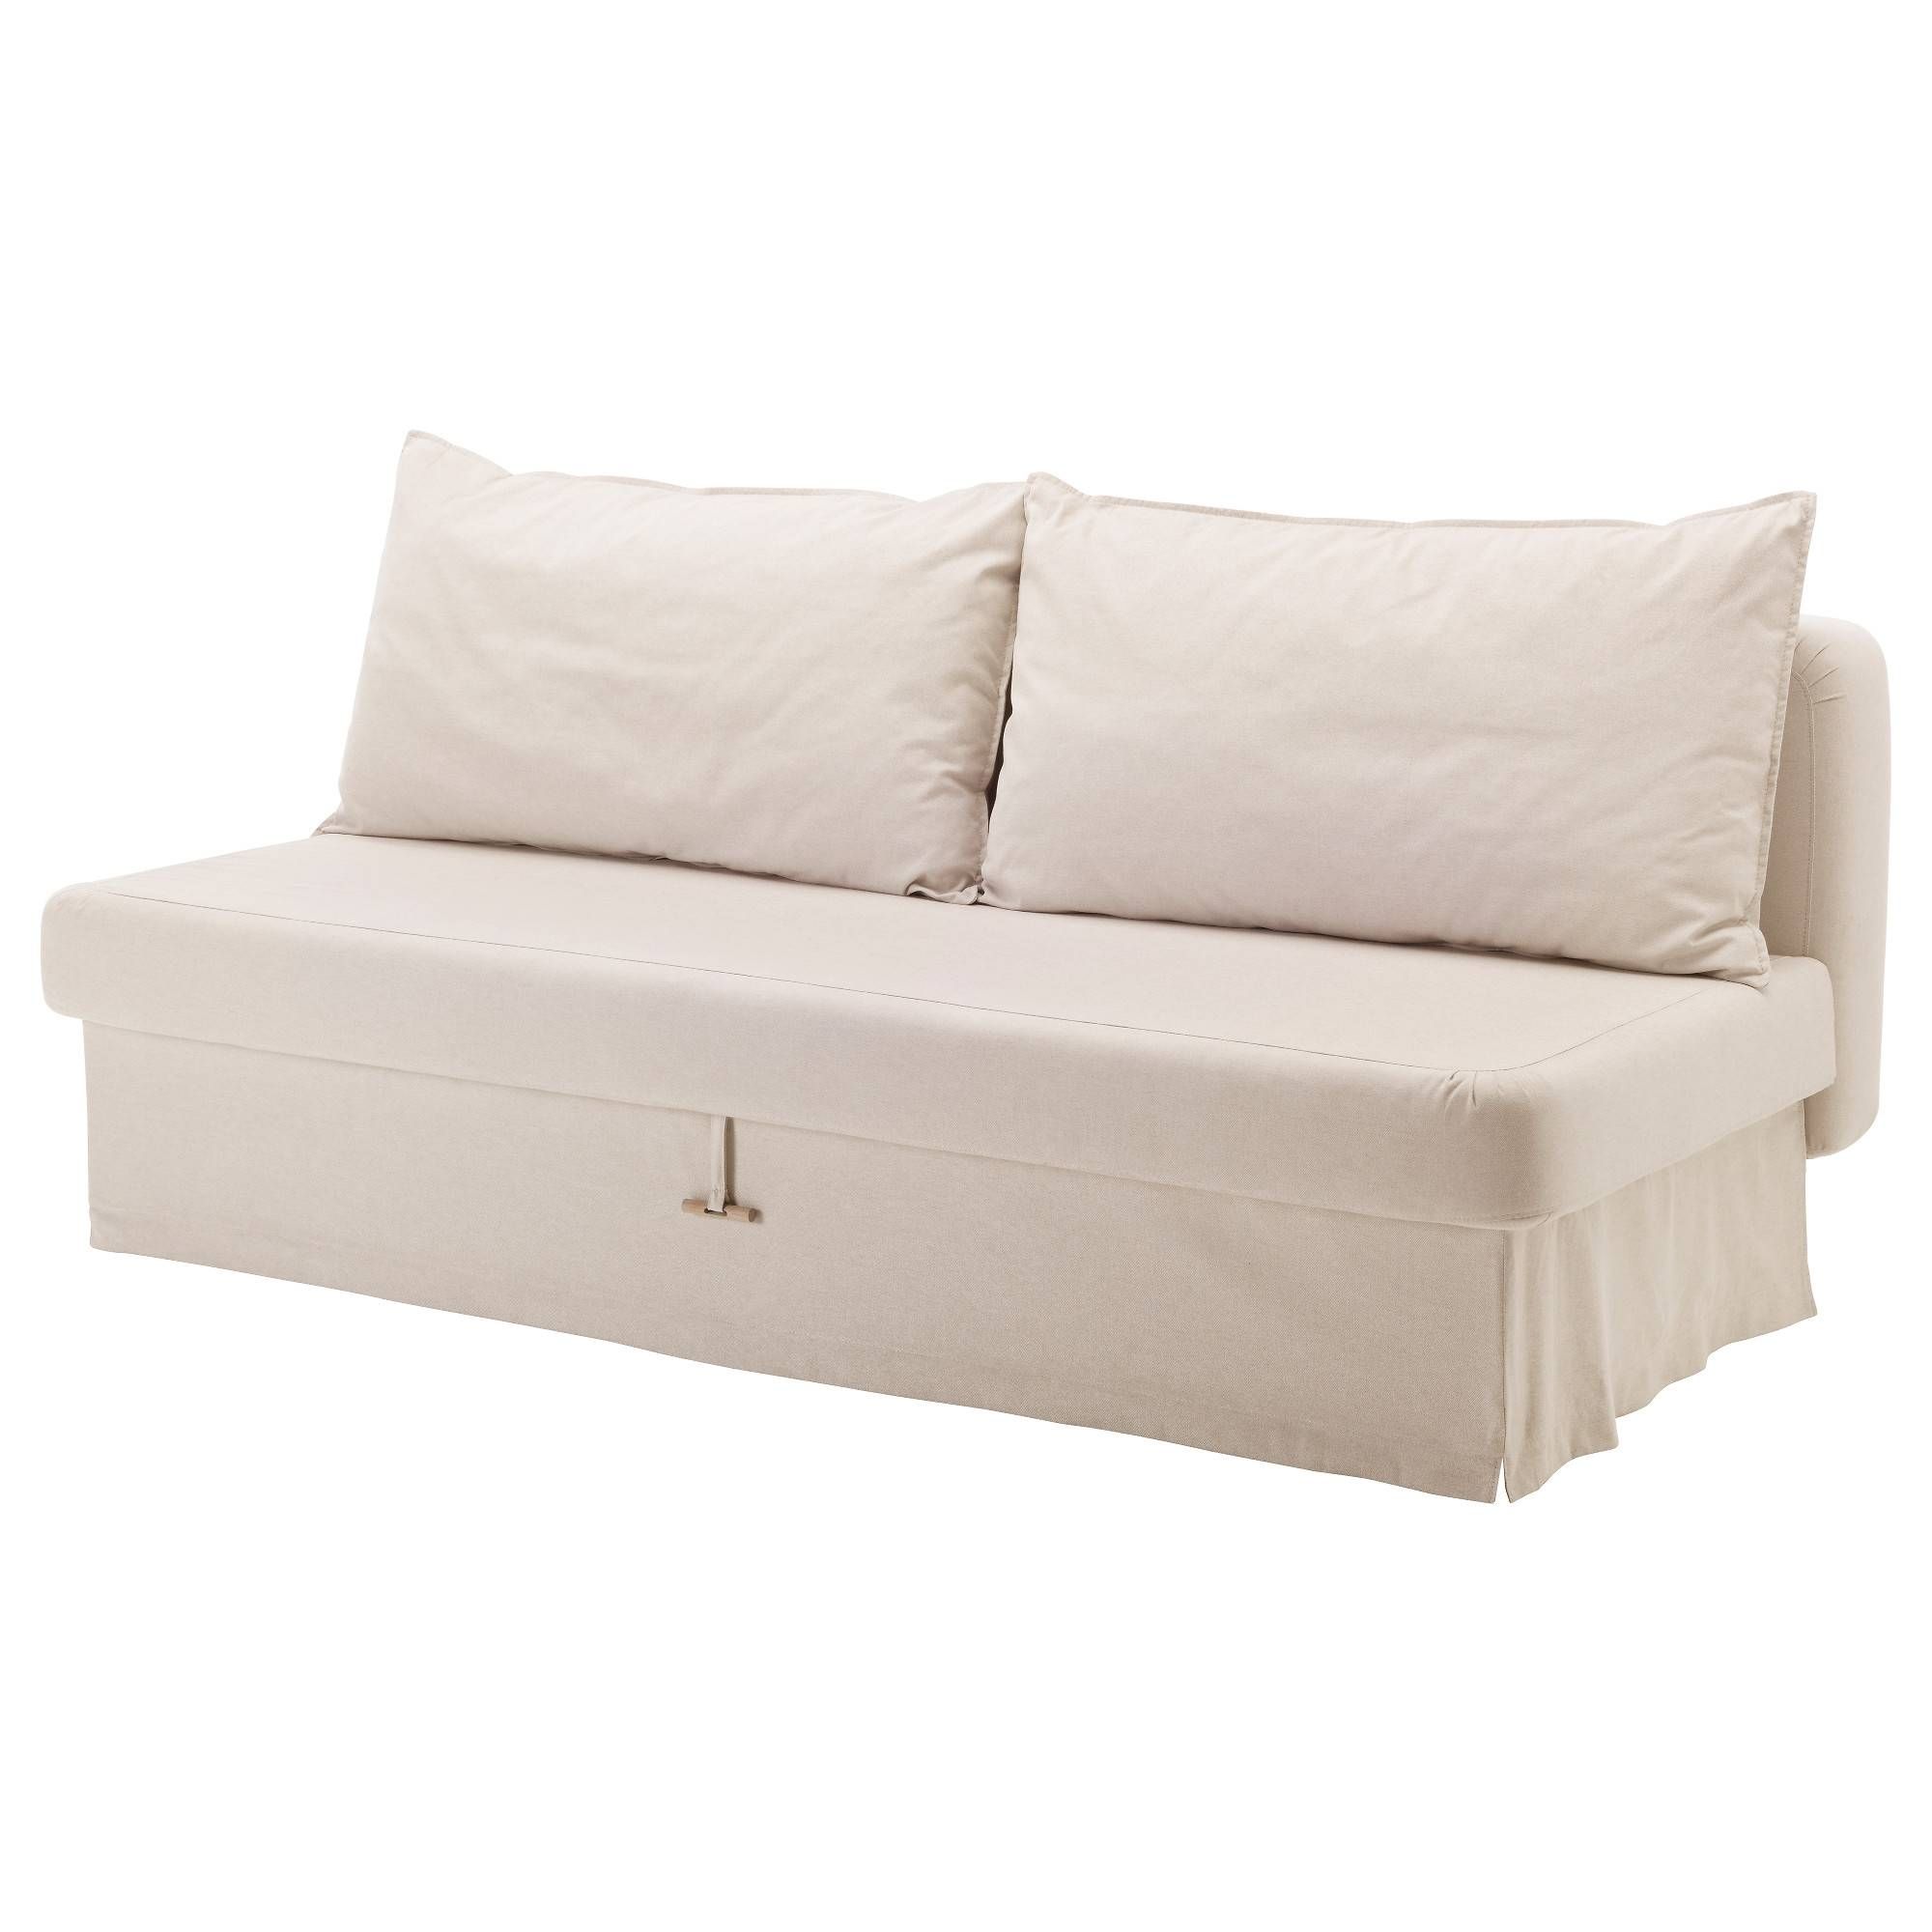 Himmene Three Seat Sofa Bed Lofallet Beige – Ikea Throughout Ikea Two Seater Sofas (View 24 of 30)